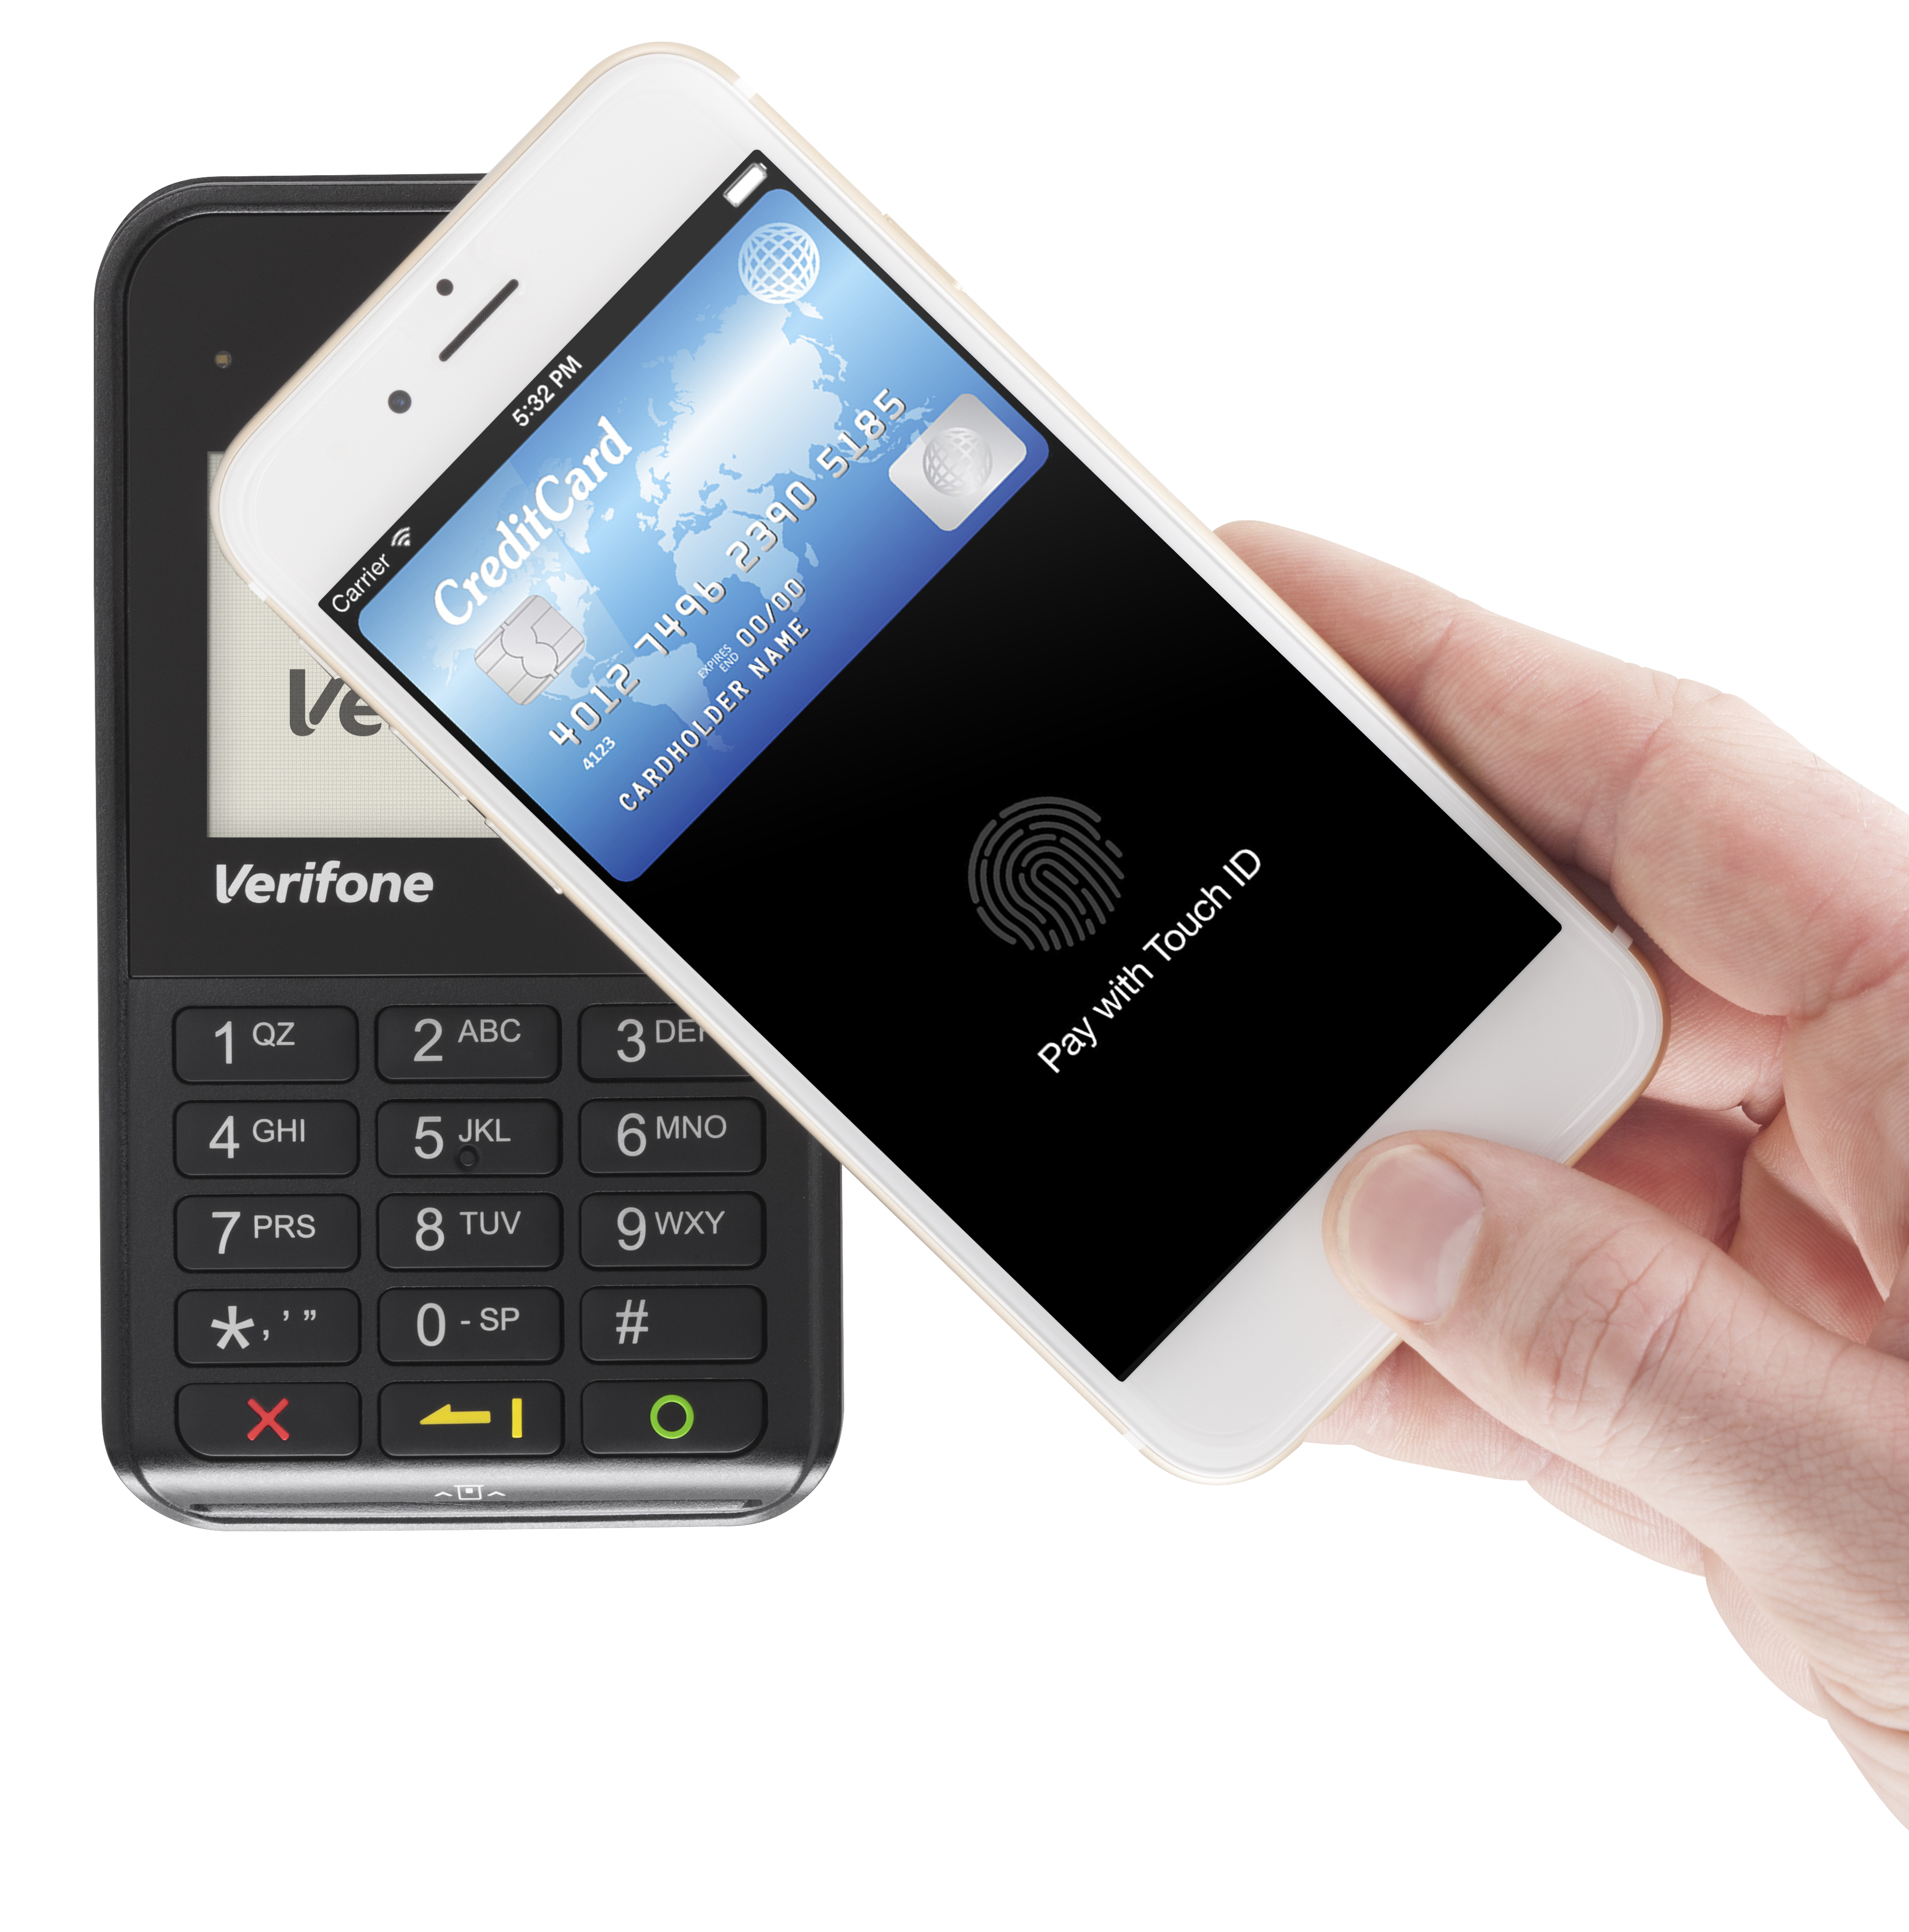 Verifone Announces Comprehensive And Flexible Mobile Point Of Sale